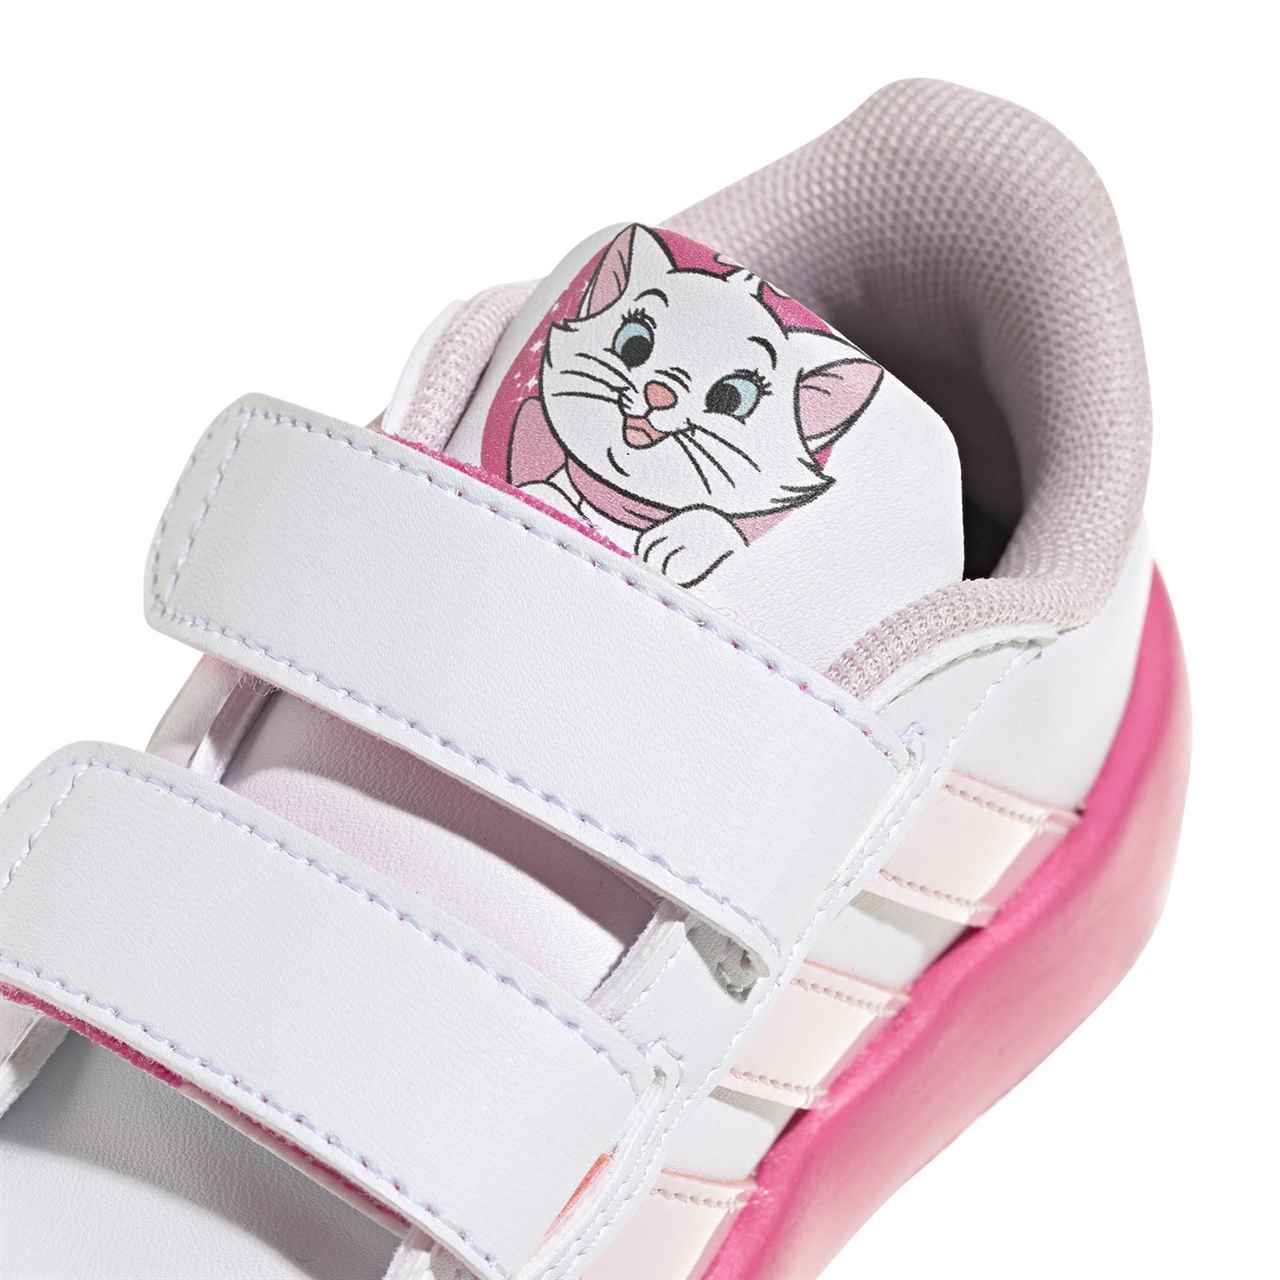 adidas Grand Court 2.0 Marie Infant Girls Tennis Shoes